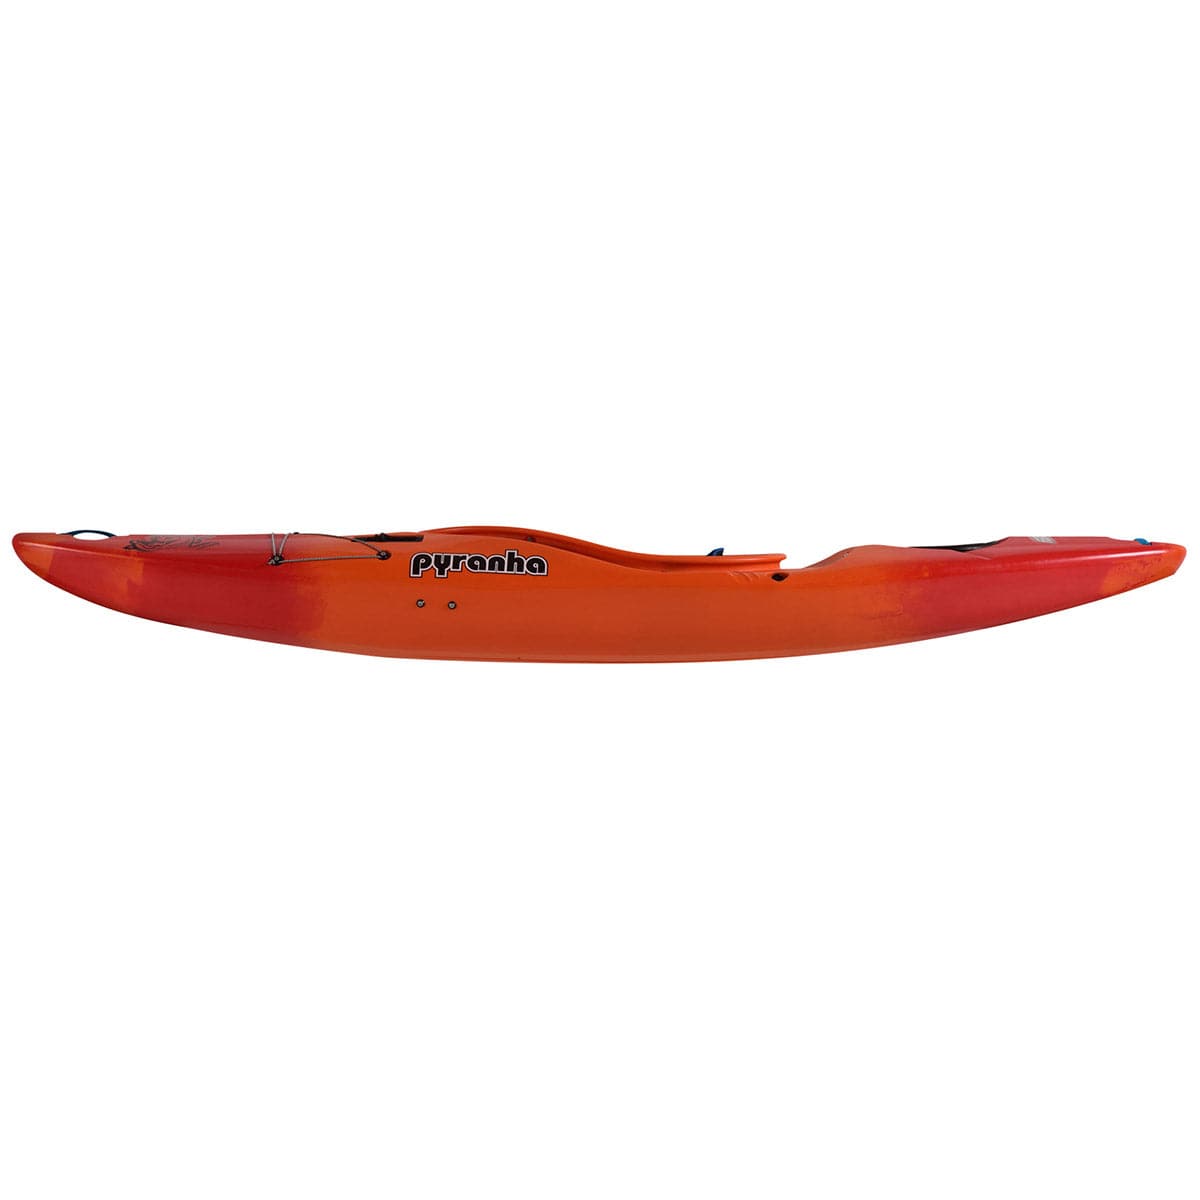 Featuring the Fusion MK II expedition / cross over kayak manufactured by Pyranha shown here from a third angle.